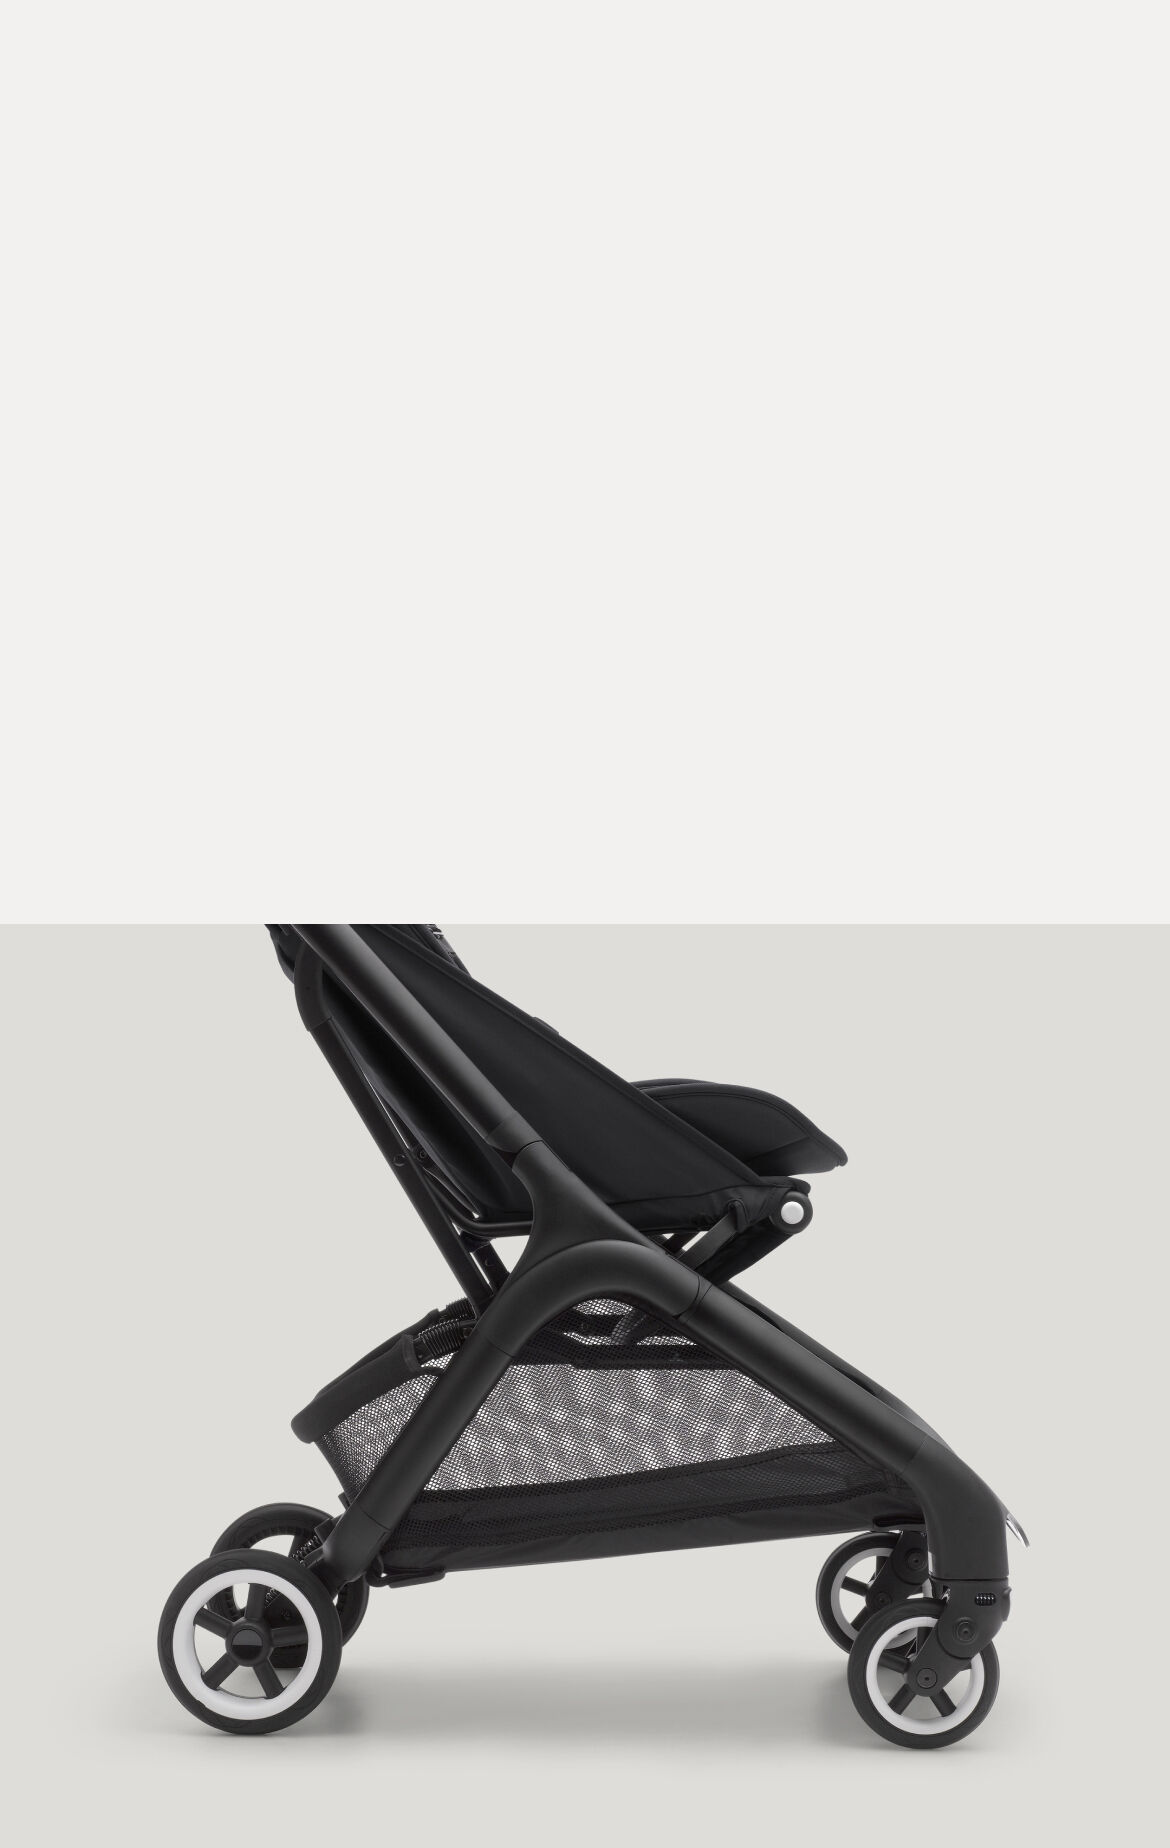 A sideway close-up of the Bugaboo Butterfly compact travel stroller's underseat basket.